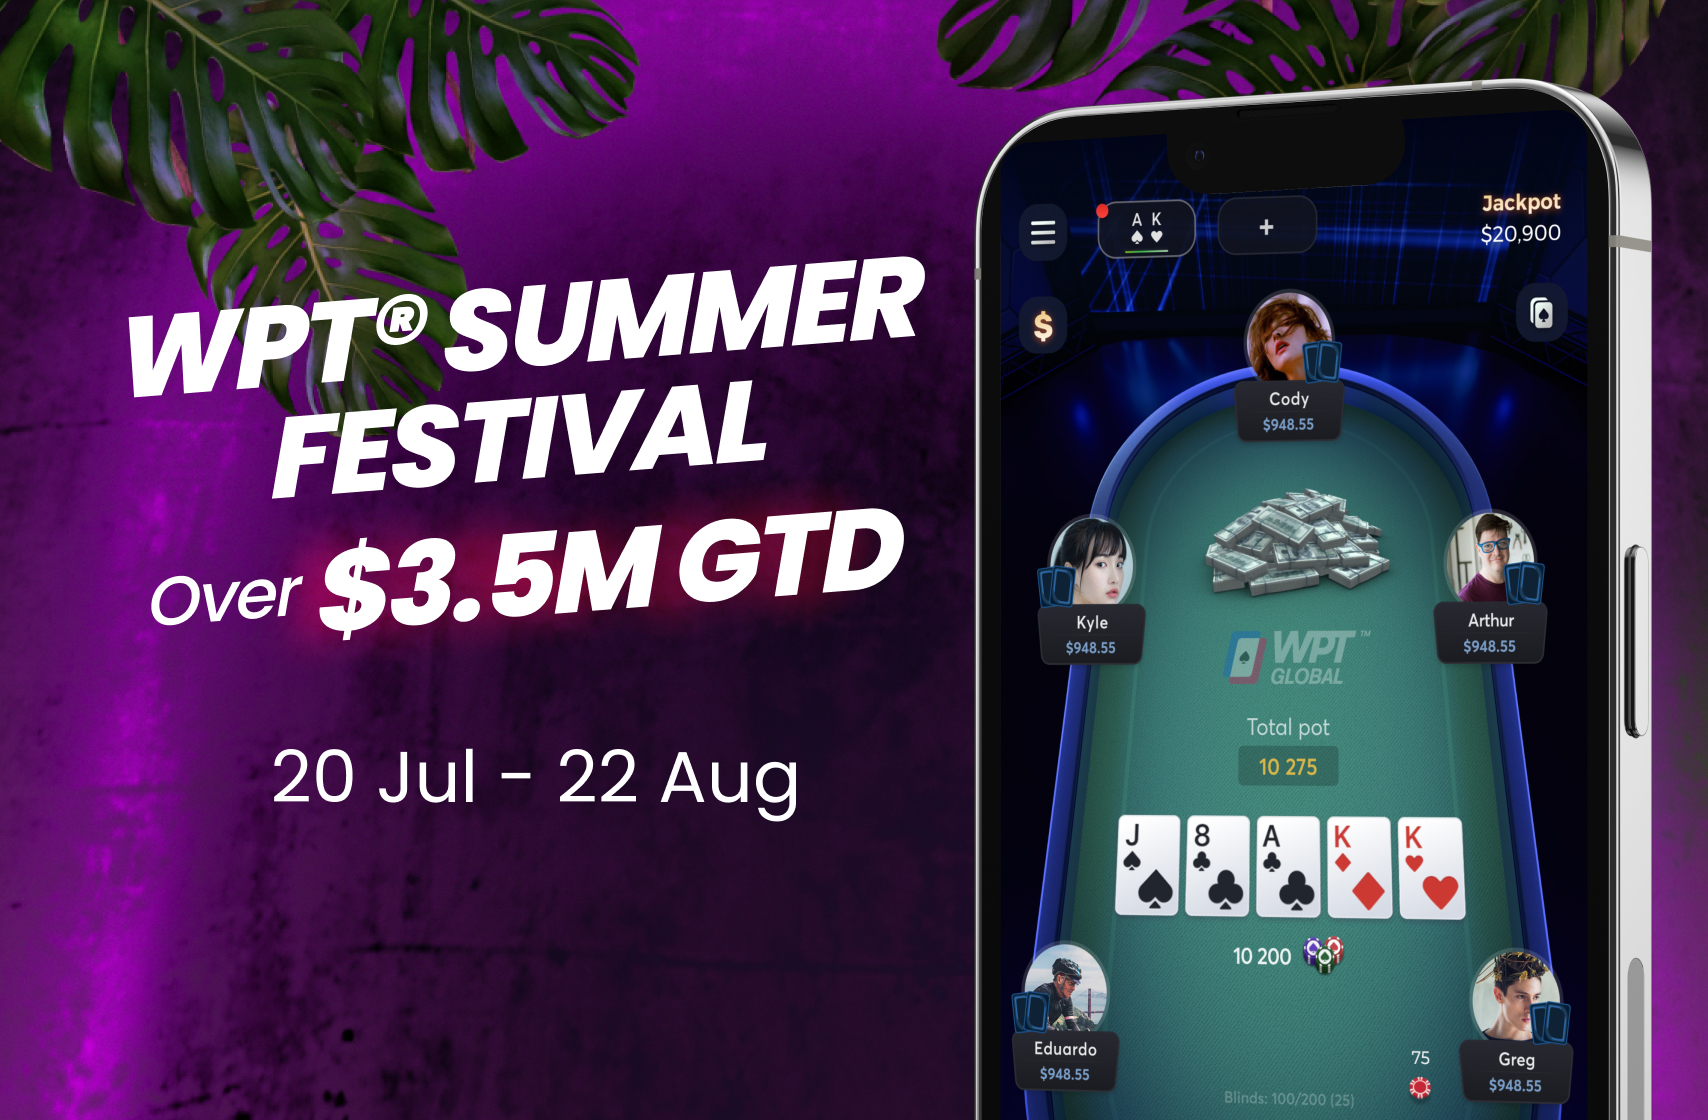 The newest entry in the international online poker game, WPT Global has more than $3.5 million guaranteed in the WPT Summer Festival